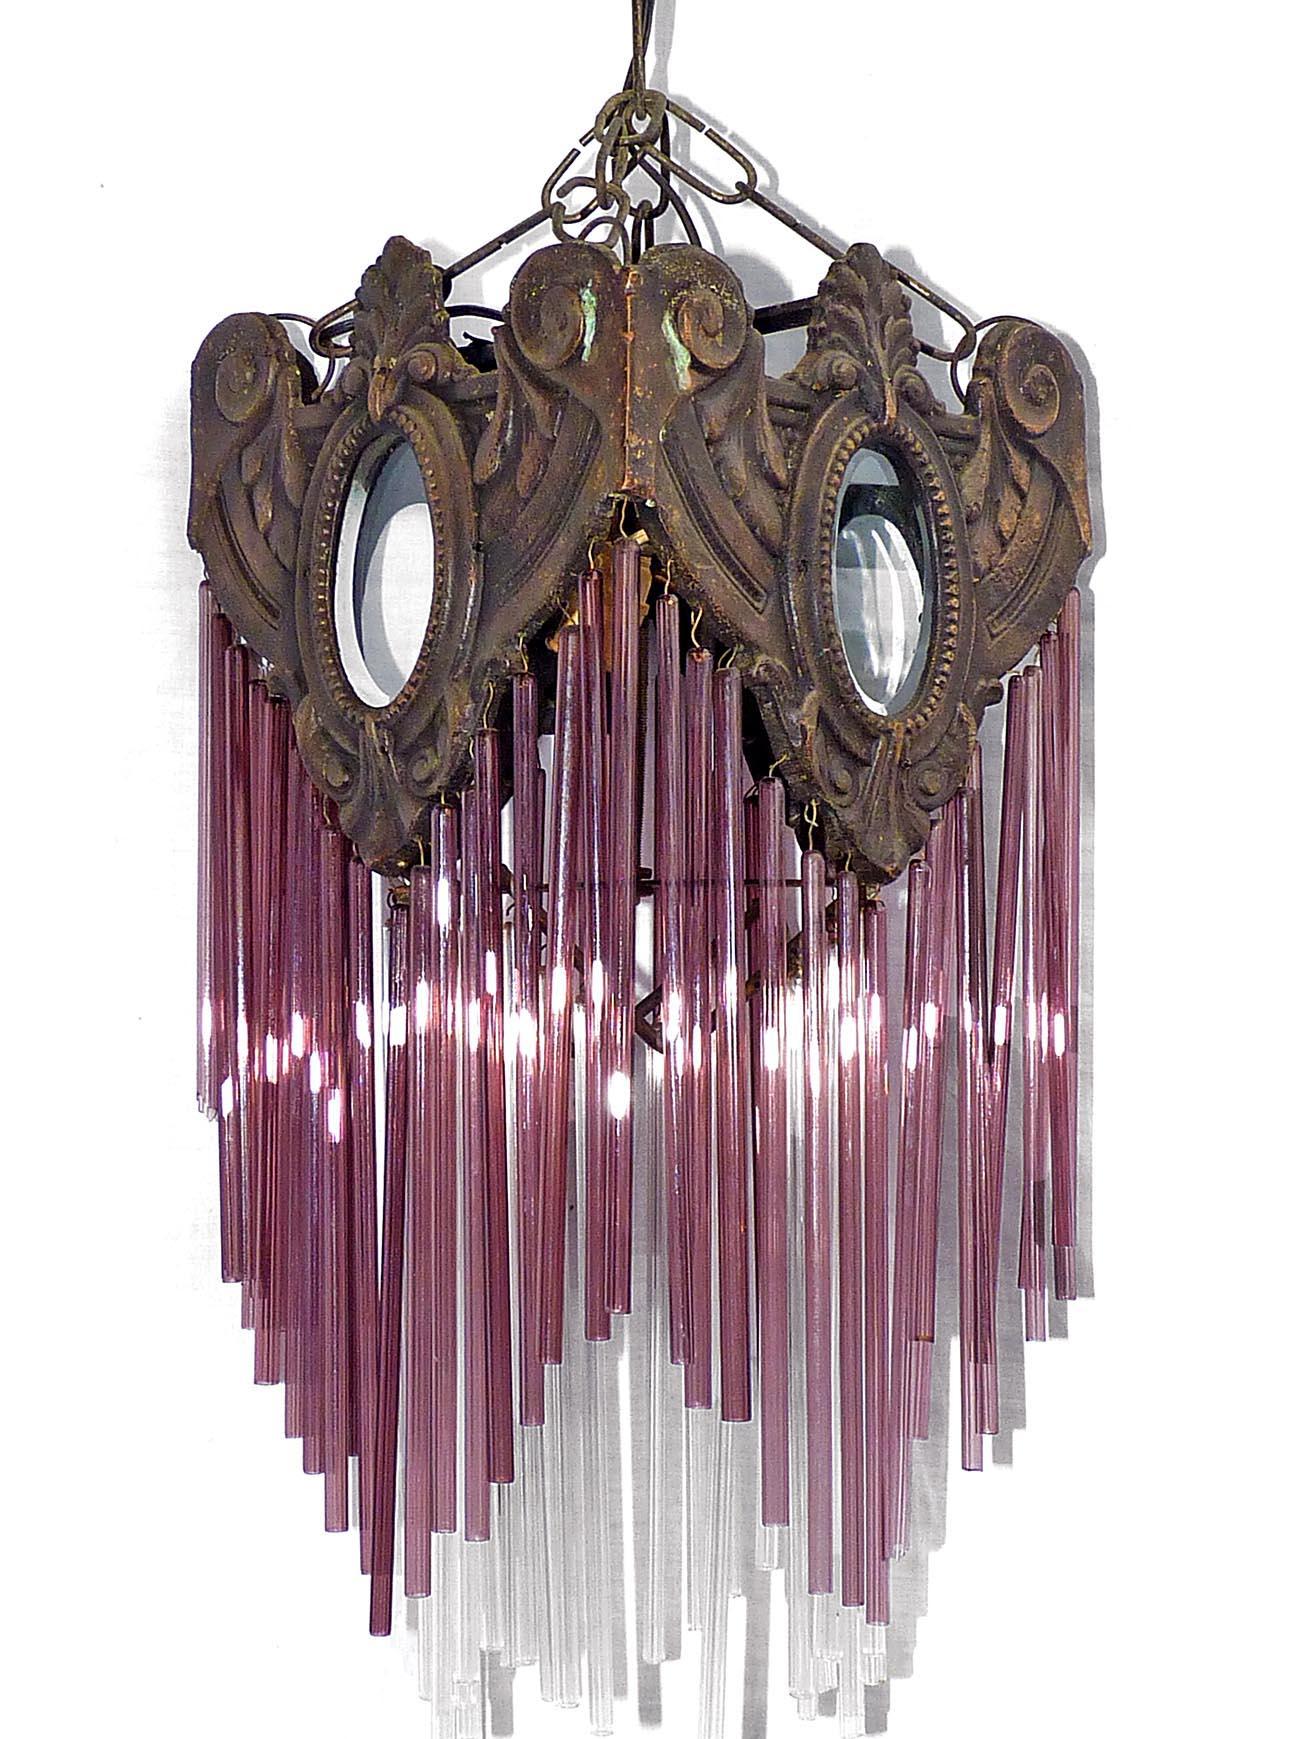 Beautiful antique French Art Nouveau Art Deco bronze lantern and purple and clear glass straw fringe, 2 tiers. Age Patina,
Measures:
Depth 7.8 in /20 cm
Width 7.8 in /20 cm
Diagonal 10.6 in/ 27 cm
Height 39.3 in (19.6 in + 19.6 in/chain) / 100 cm